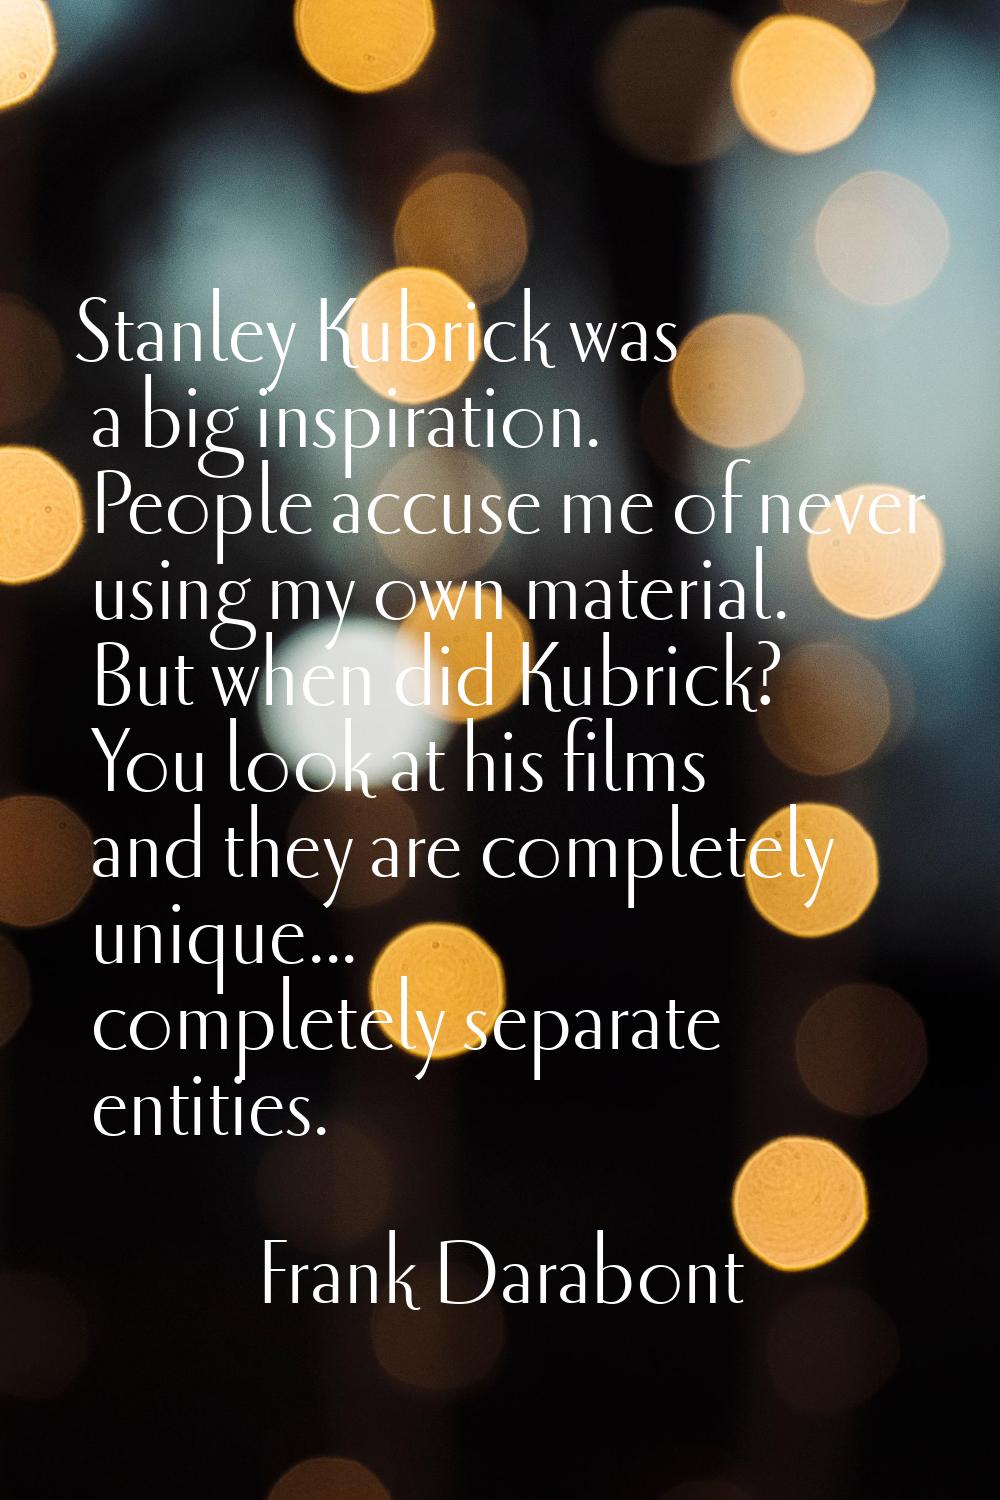 Stanley Kubrick was a big inspiration. People accuse me of never using my own material. But when di